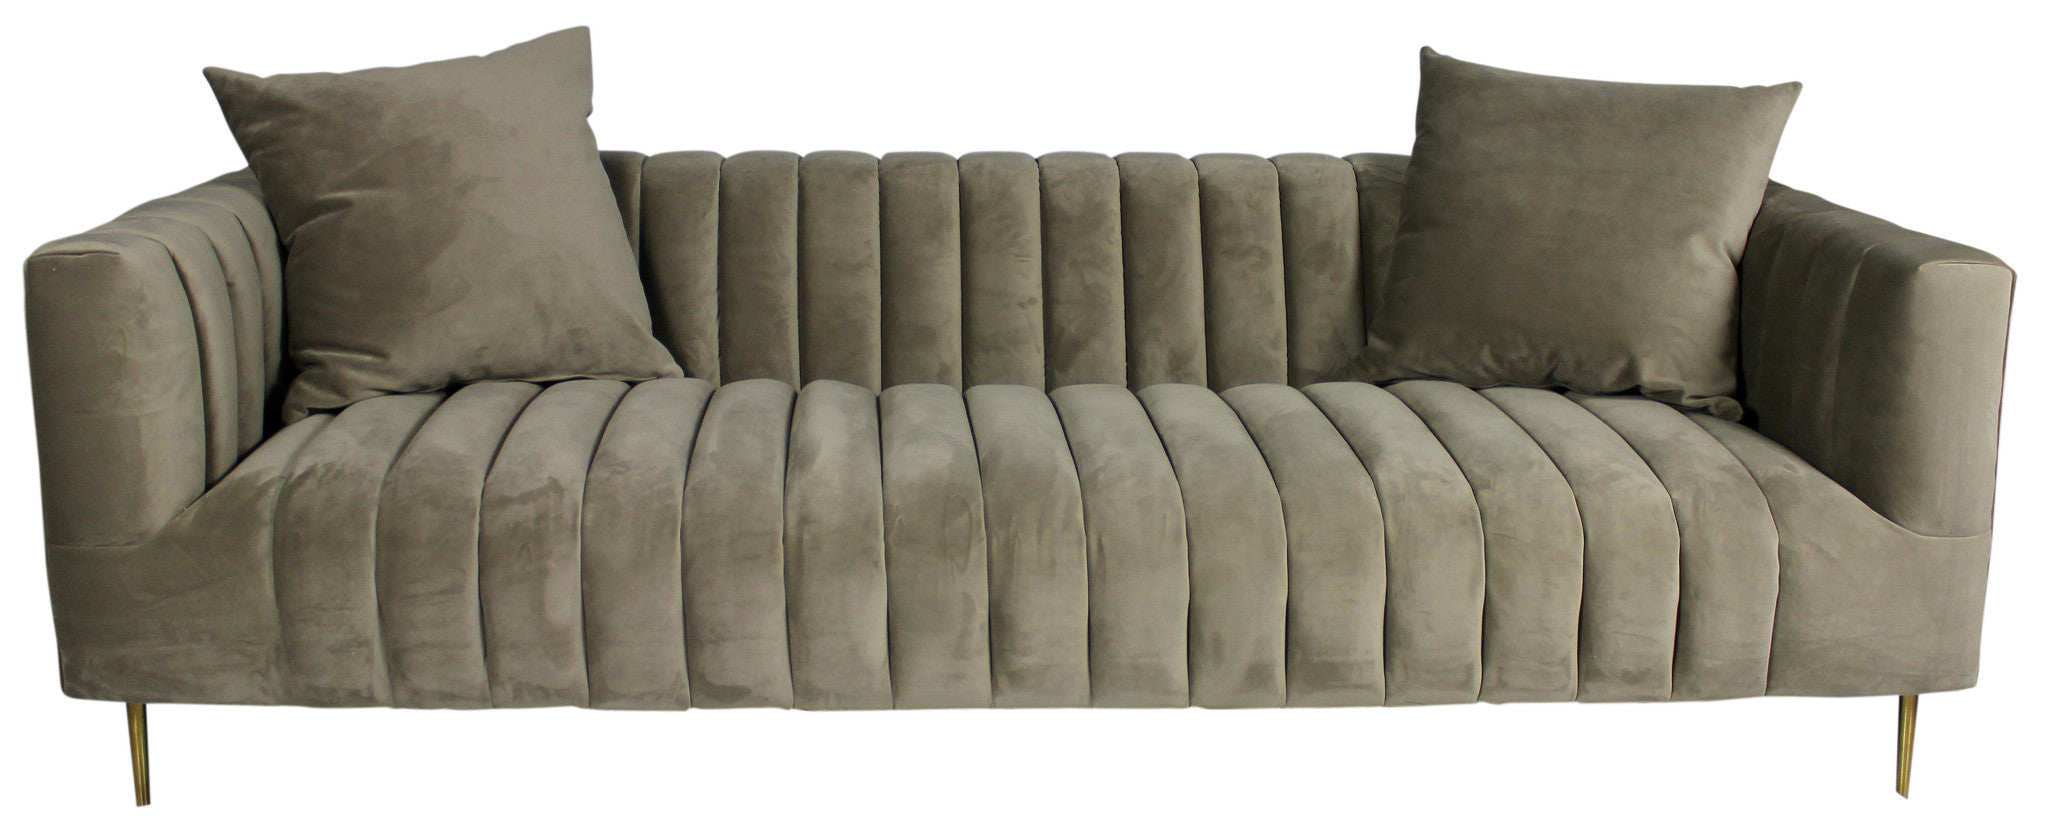 90" Gray Brown Velvet And Gold Sofa And Toss Pillows